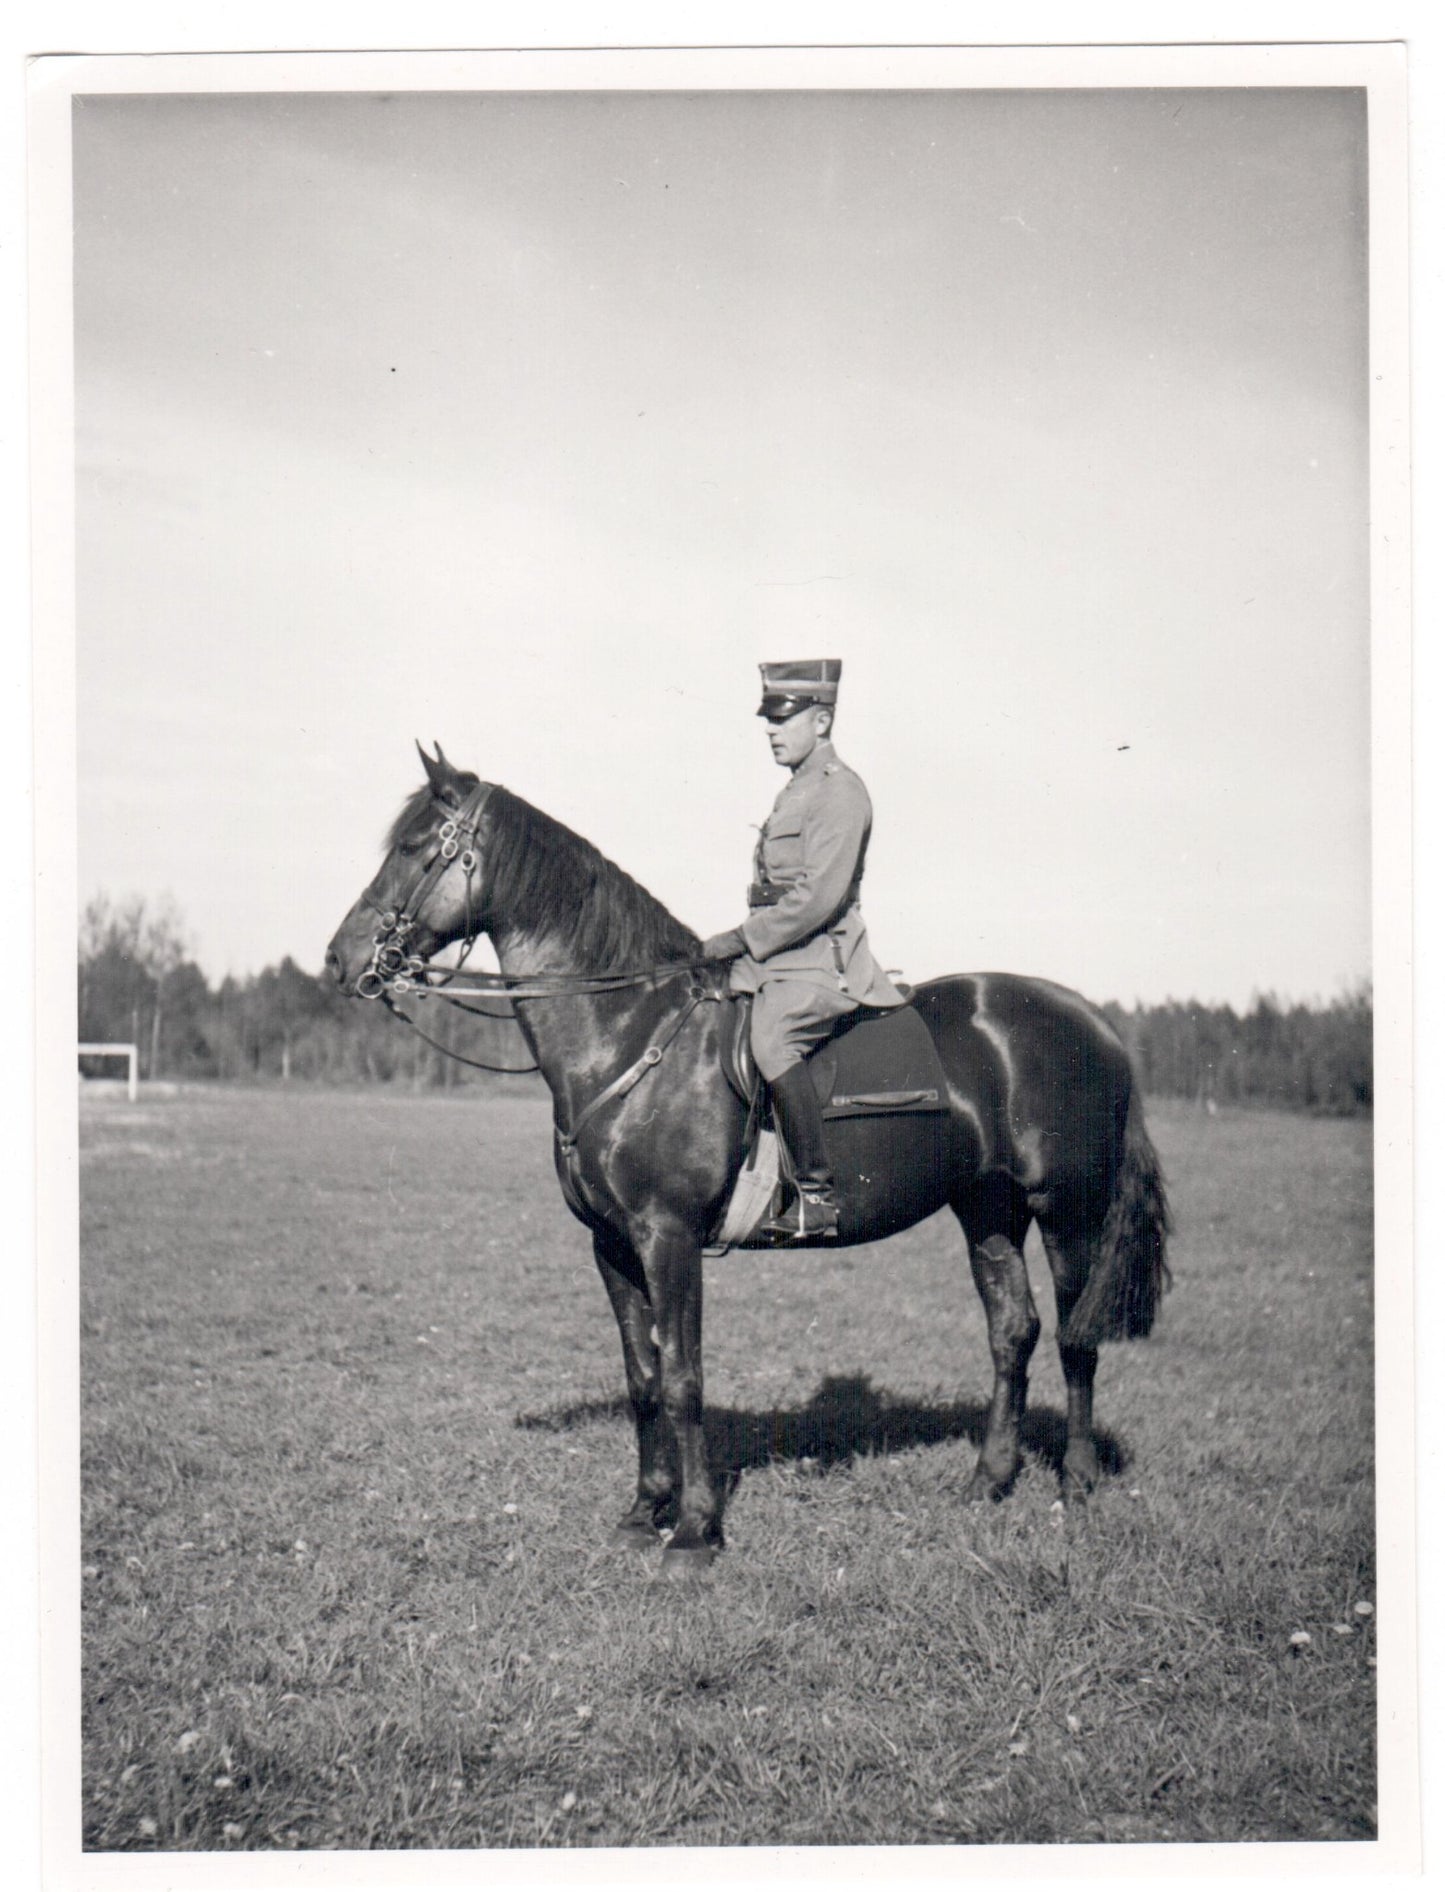 Vintage Military Photography - Swedish Officer - Serviceman on Horse - Sweden